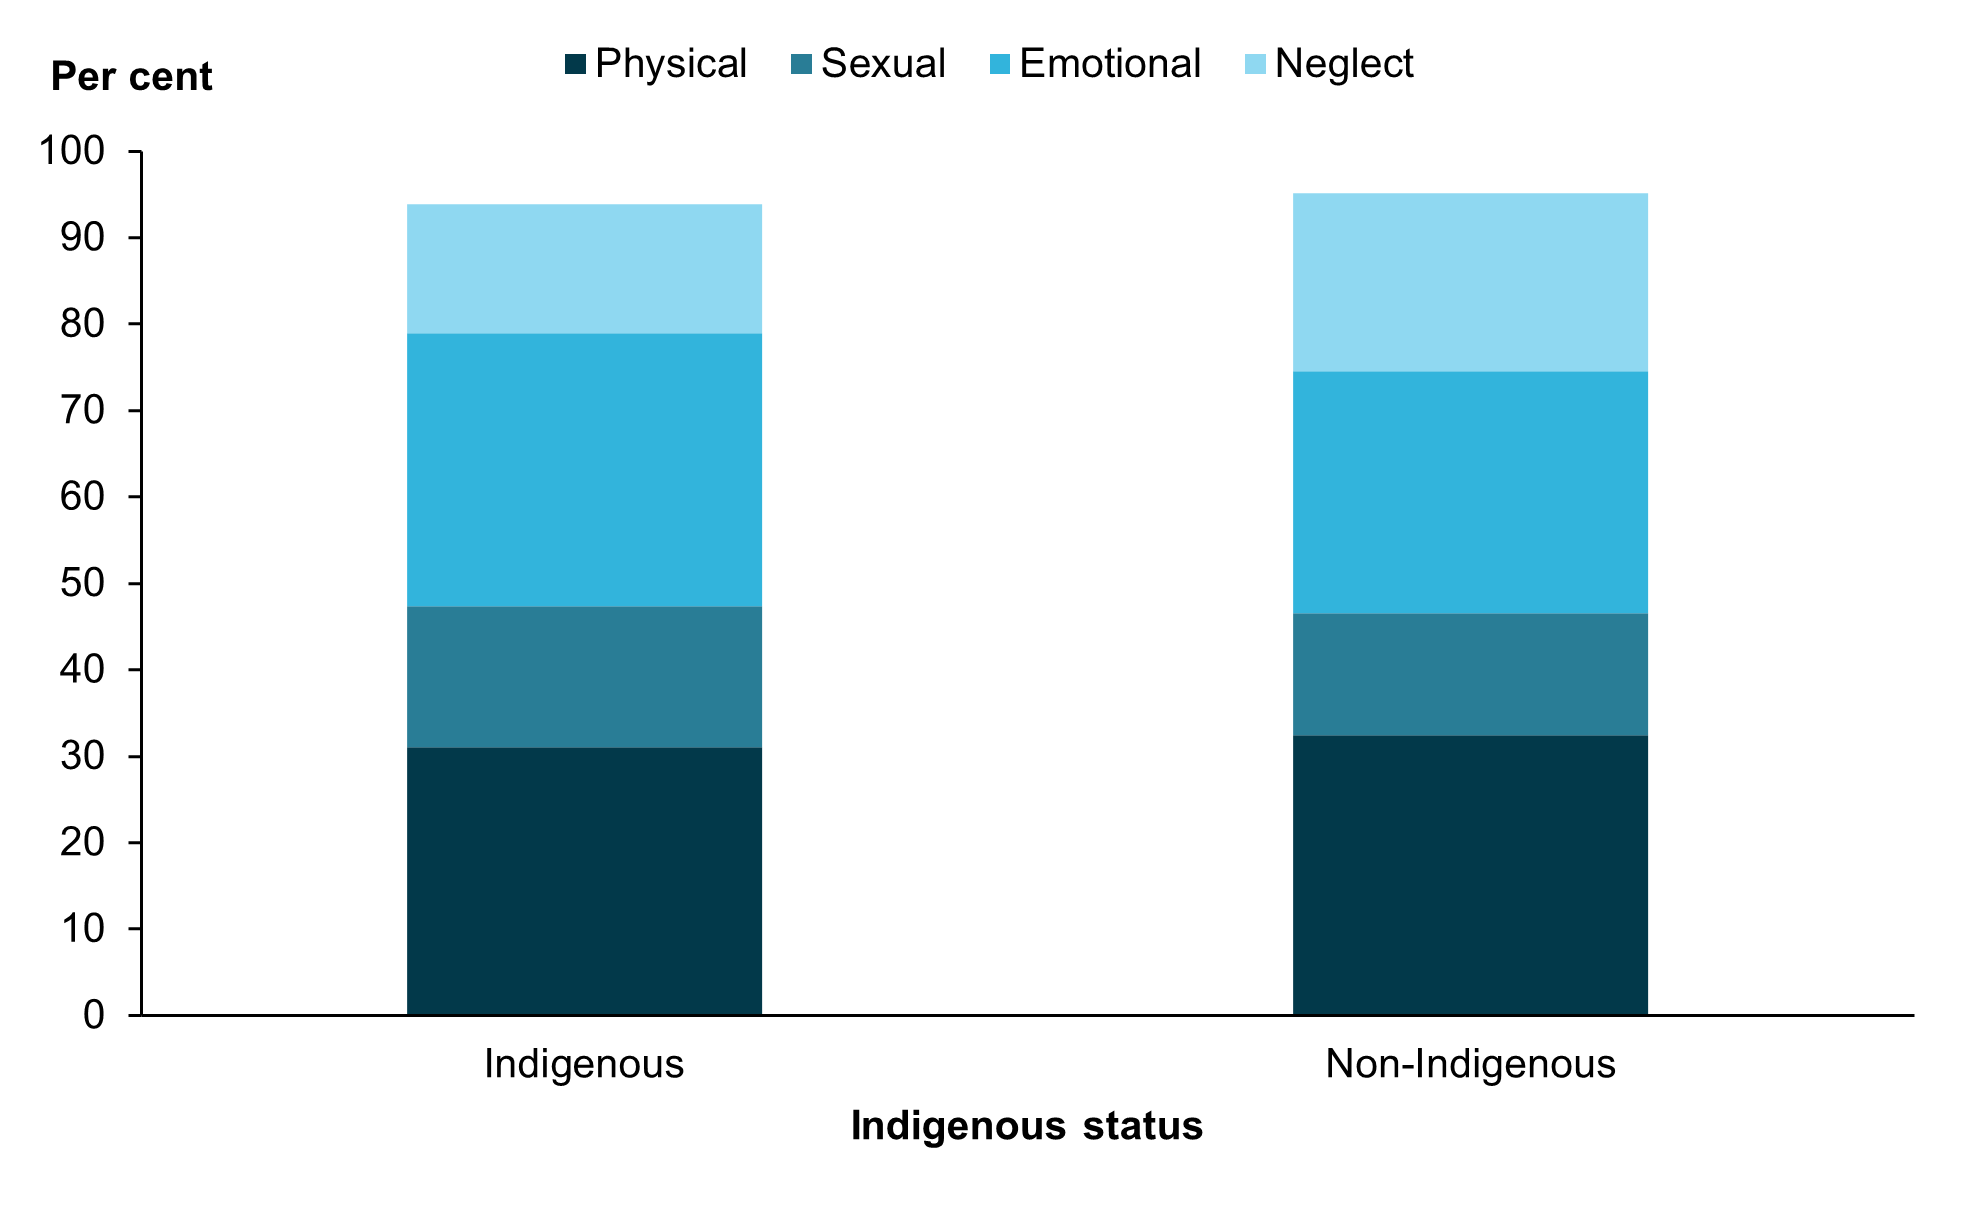 Chart shows substantiations of physical abuse and sexual abuse were similar for Aboriginal and Torres Strait Islander children and non-Indigenous children. Emotional abuse was most common among Aboriginal and Torres Strait islander children while neglect was most common for non-Indigenous children.